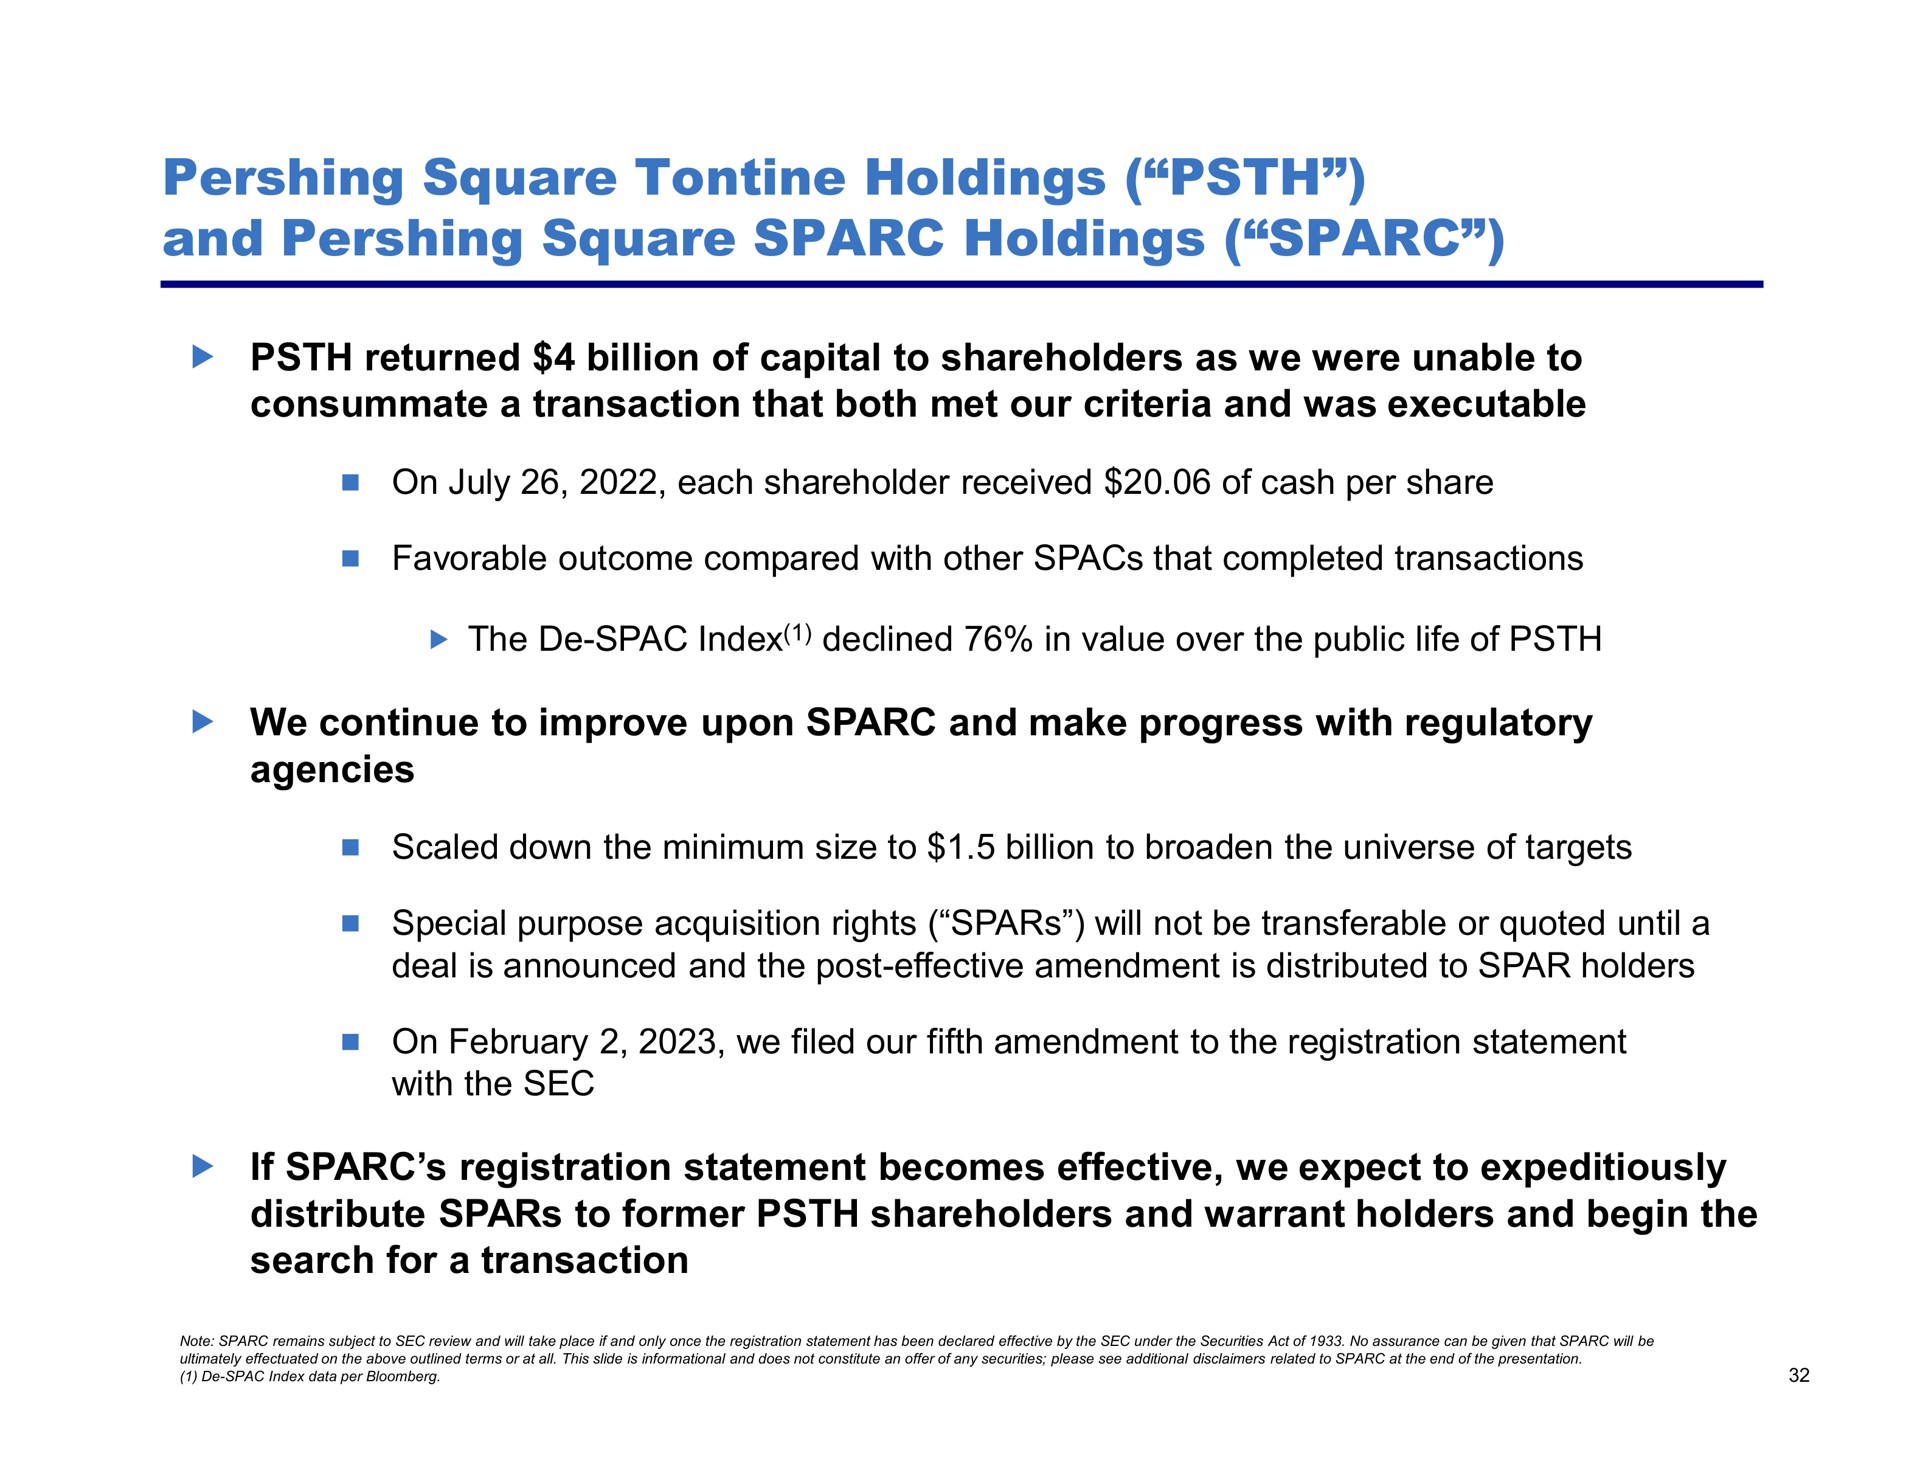 square tontine holdings and square holdings returned billion of capital to shareholders as we were unable to consummate a transaction that both met our criteria and was executable we continue to improve upon and make progress with regulatory agencies if registration statement becomes effective we expect to expeditiously distribute spars to former shareholders and warrant holders and begin the search for a transaction | Pershing Square